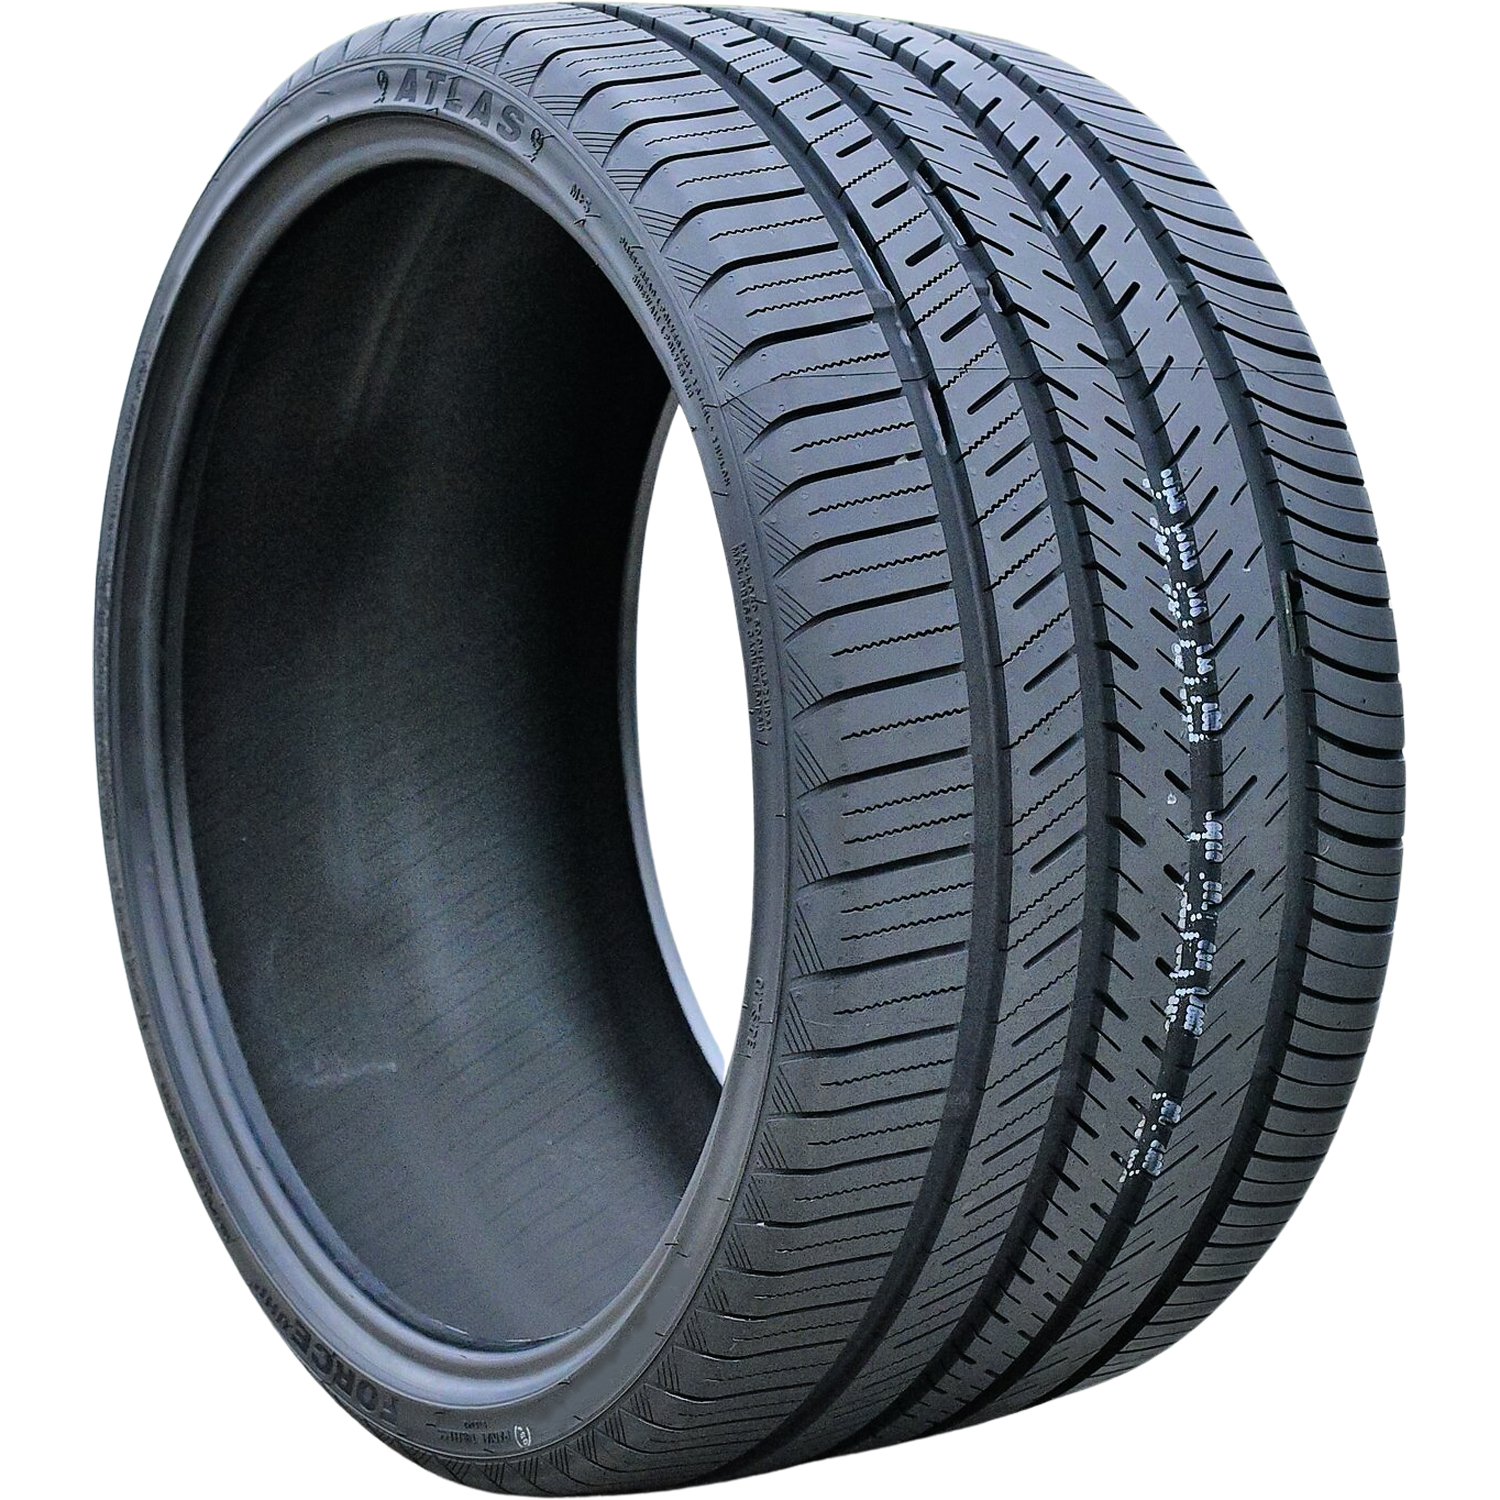 Tire Atlas Force UHP 285/25R20 93W XL A/S High Performance